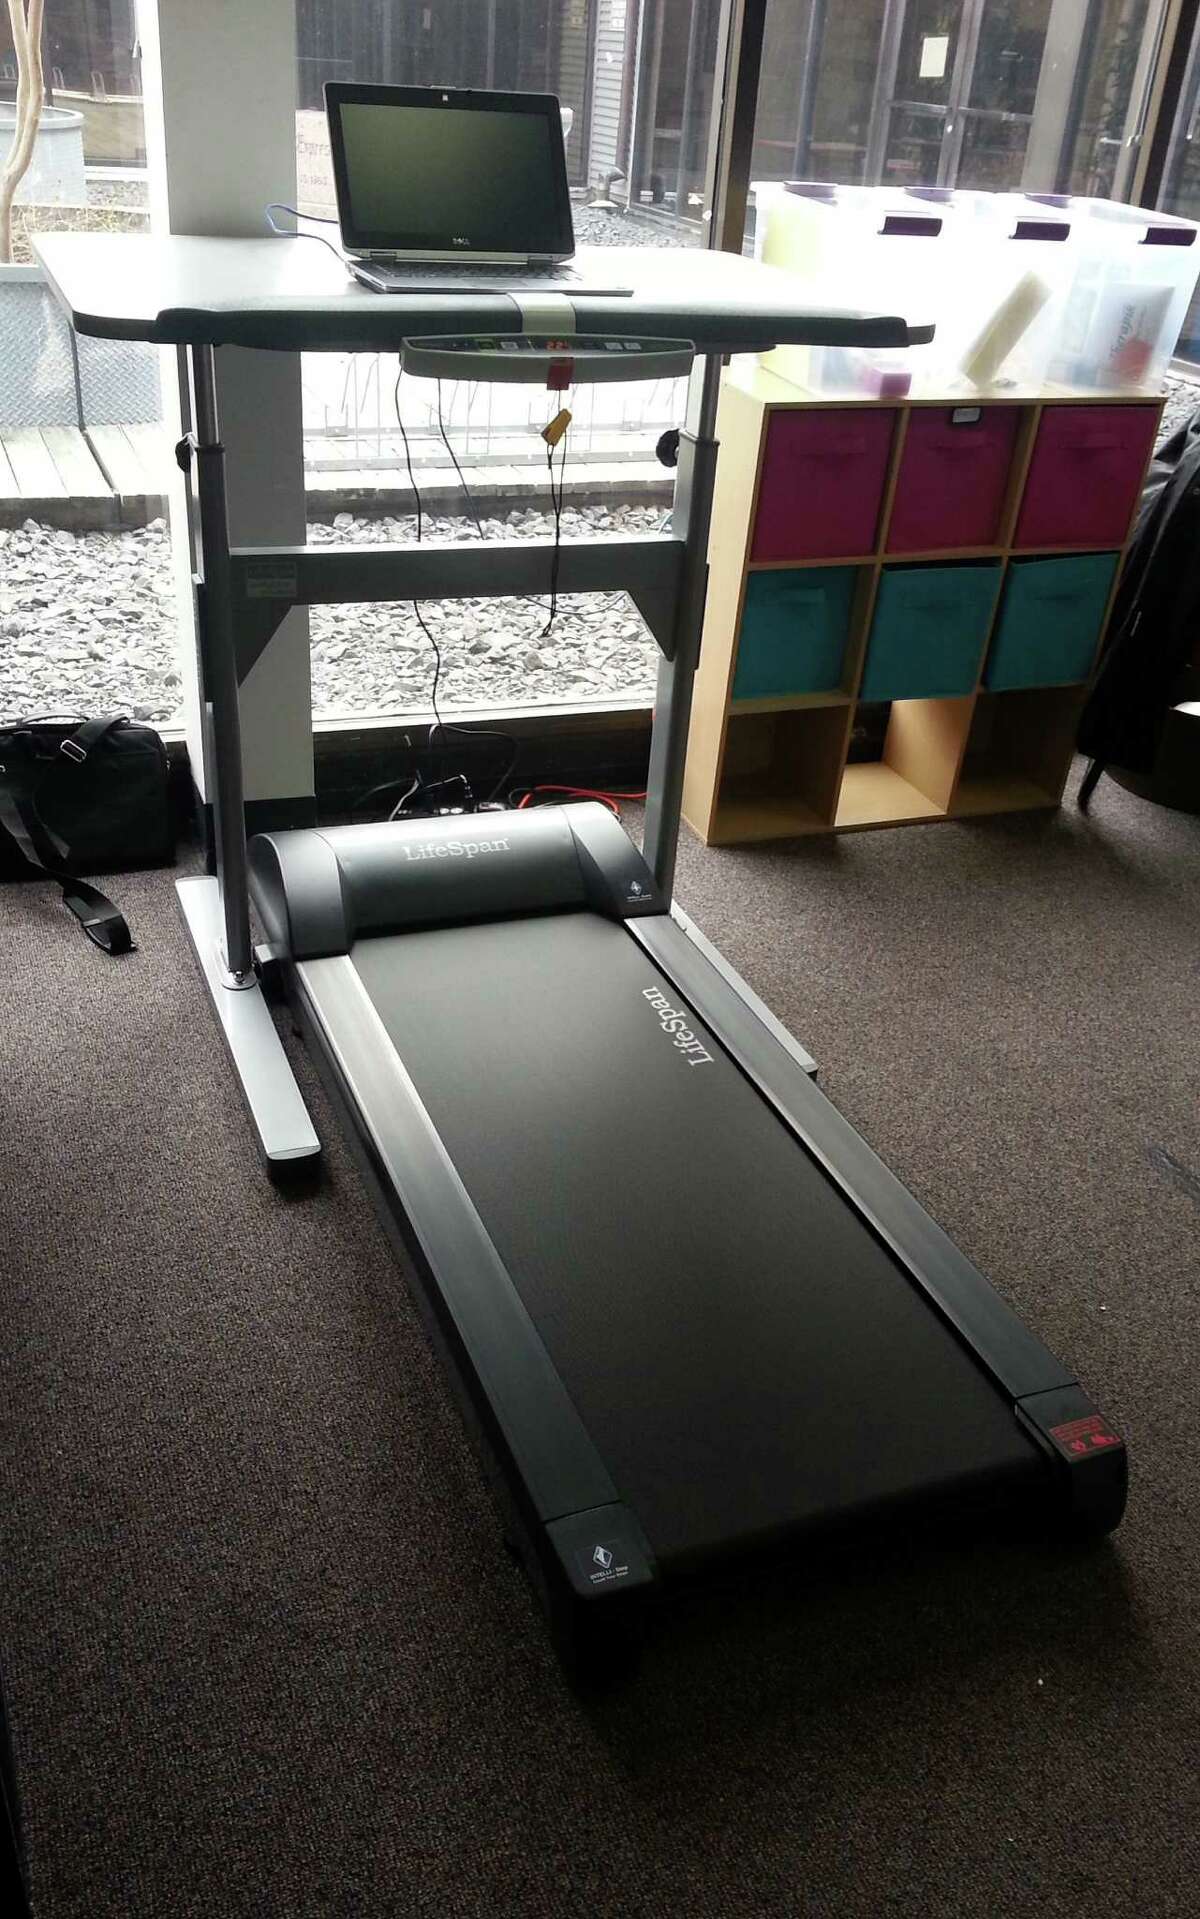 A Lifespan TR1200-DT5 Treadmill Desk allows one to exercise while working.